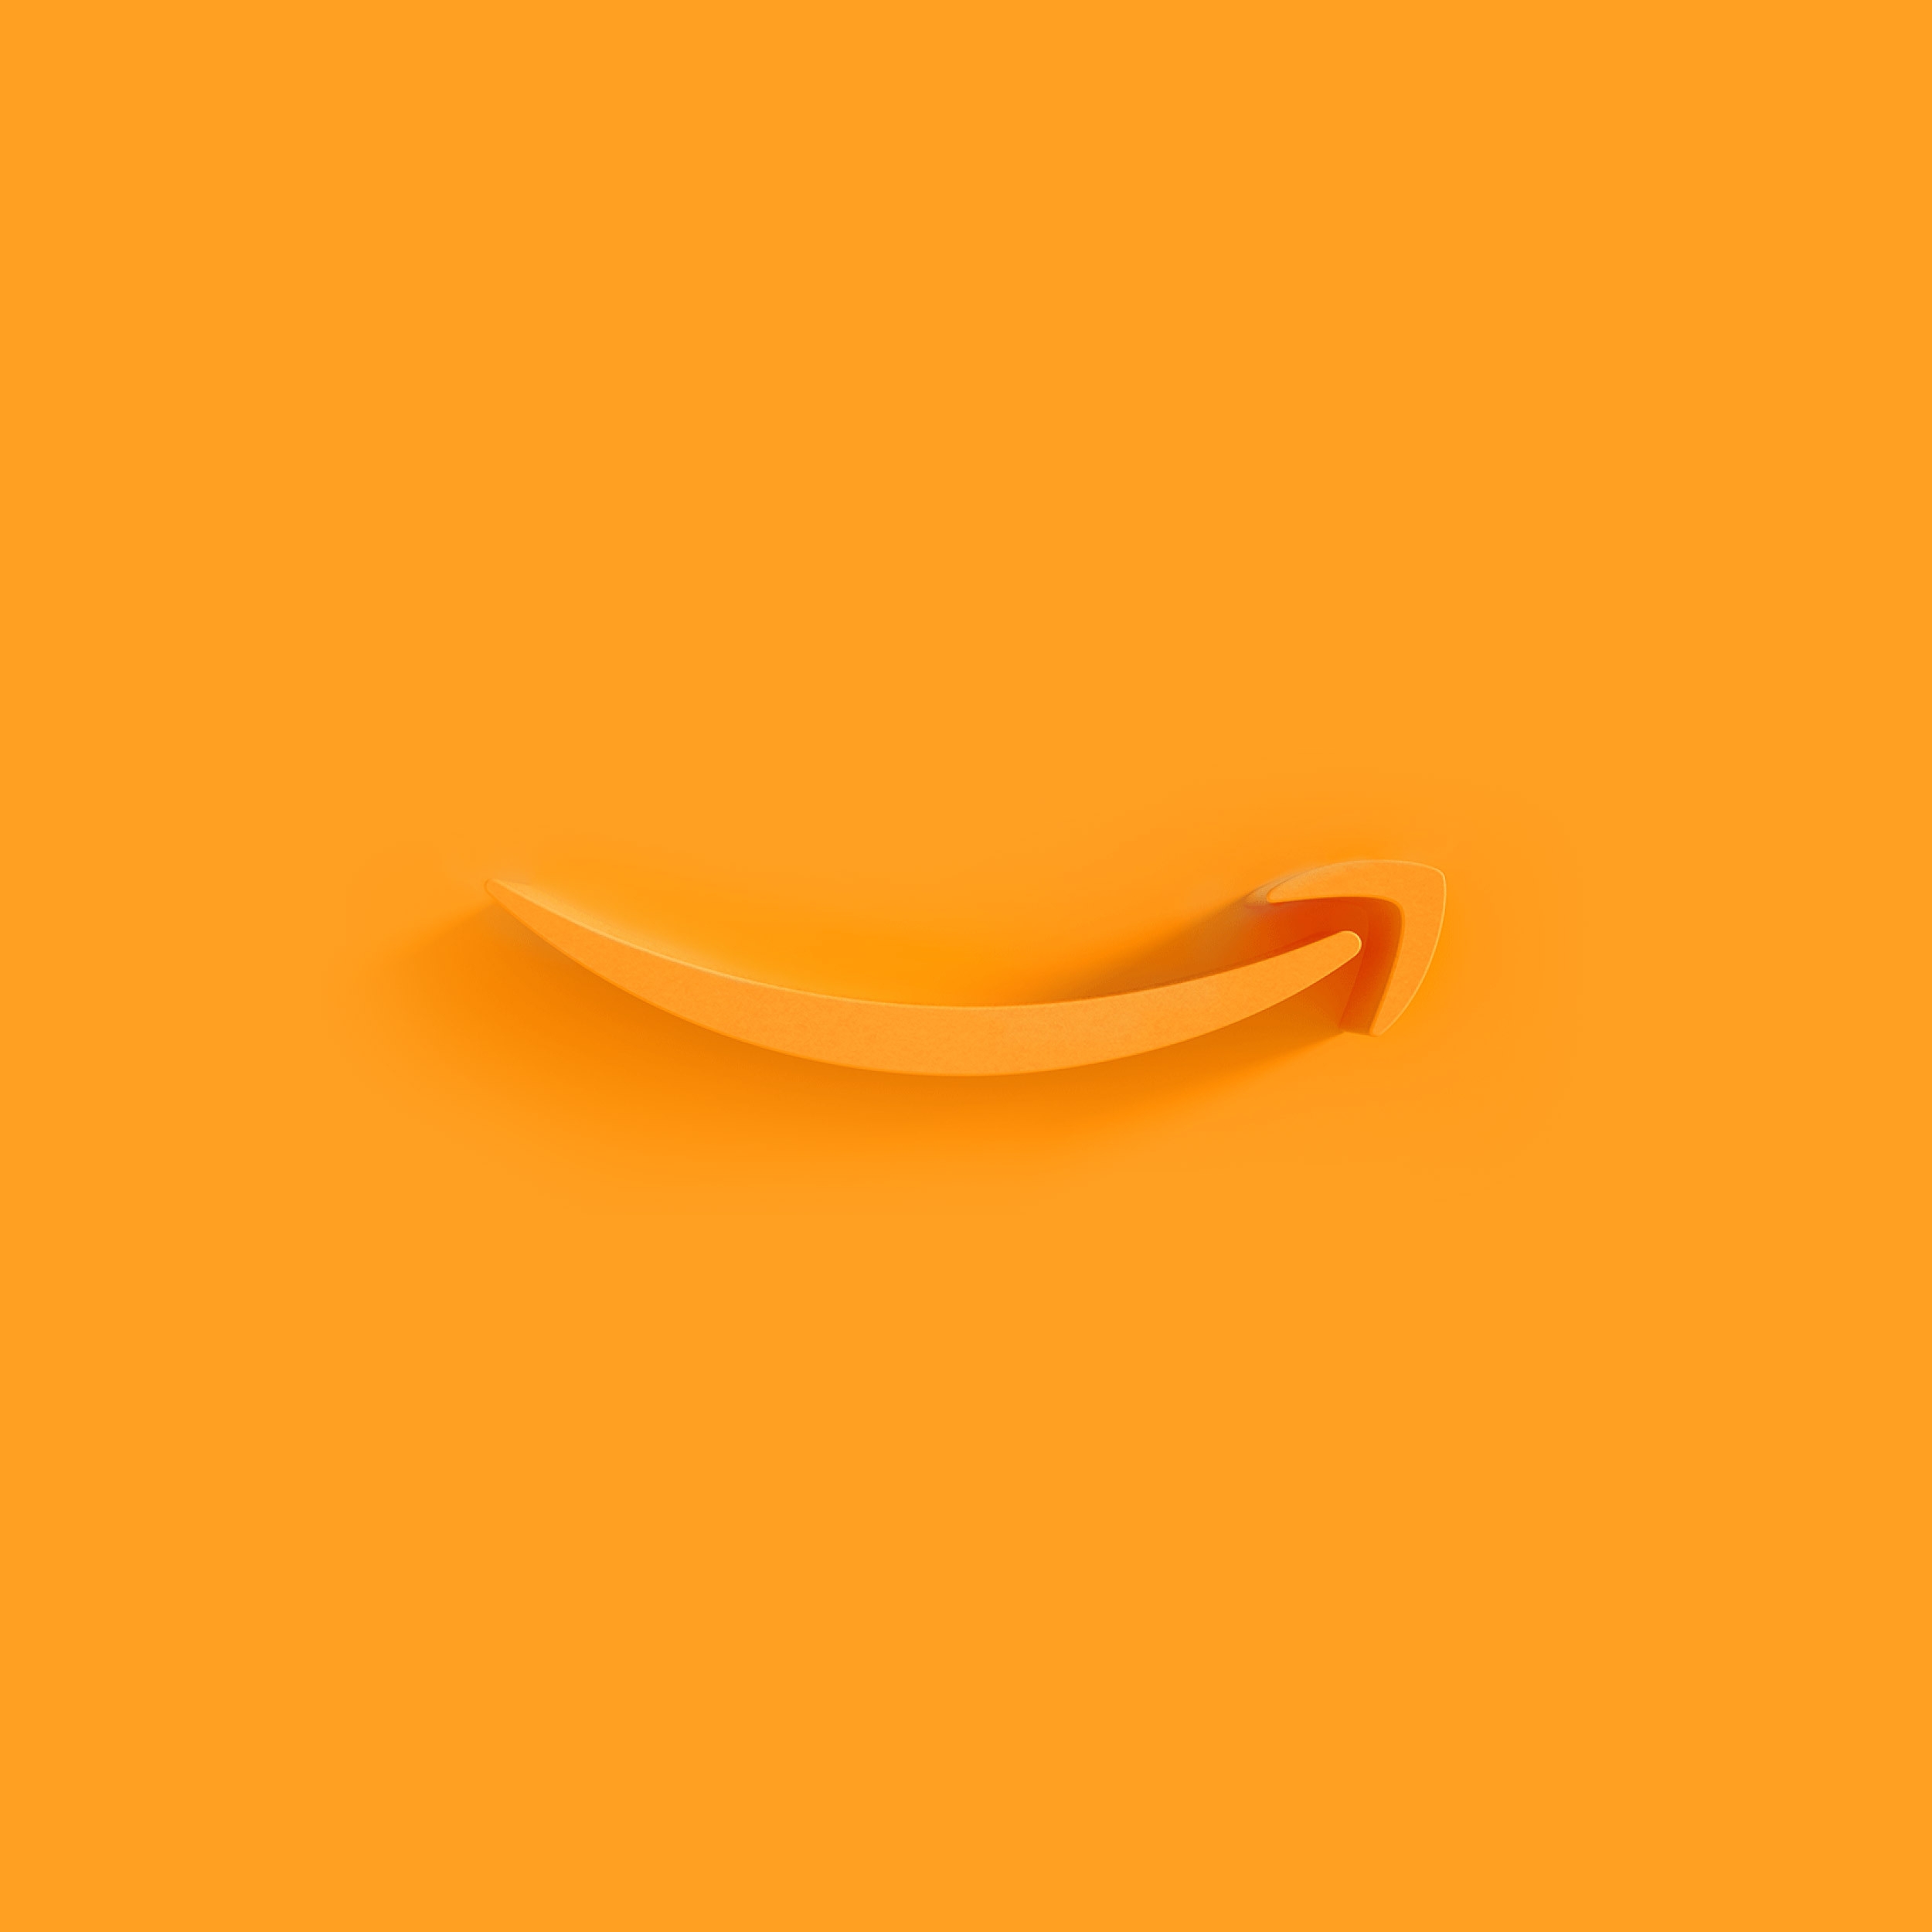 Amazon's orange smile logo appears as an extruded plastic form on an orange background, with a shadow cast by a light source from the right